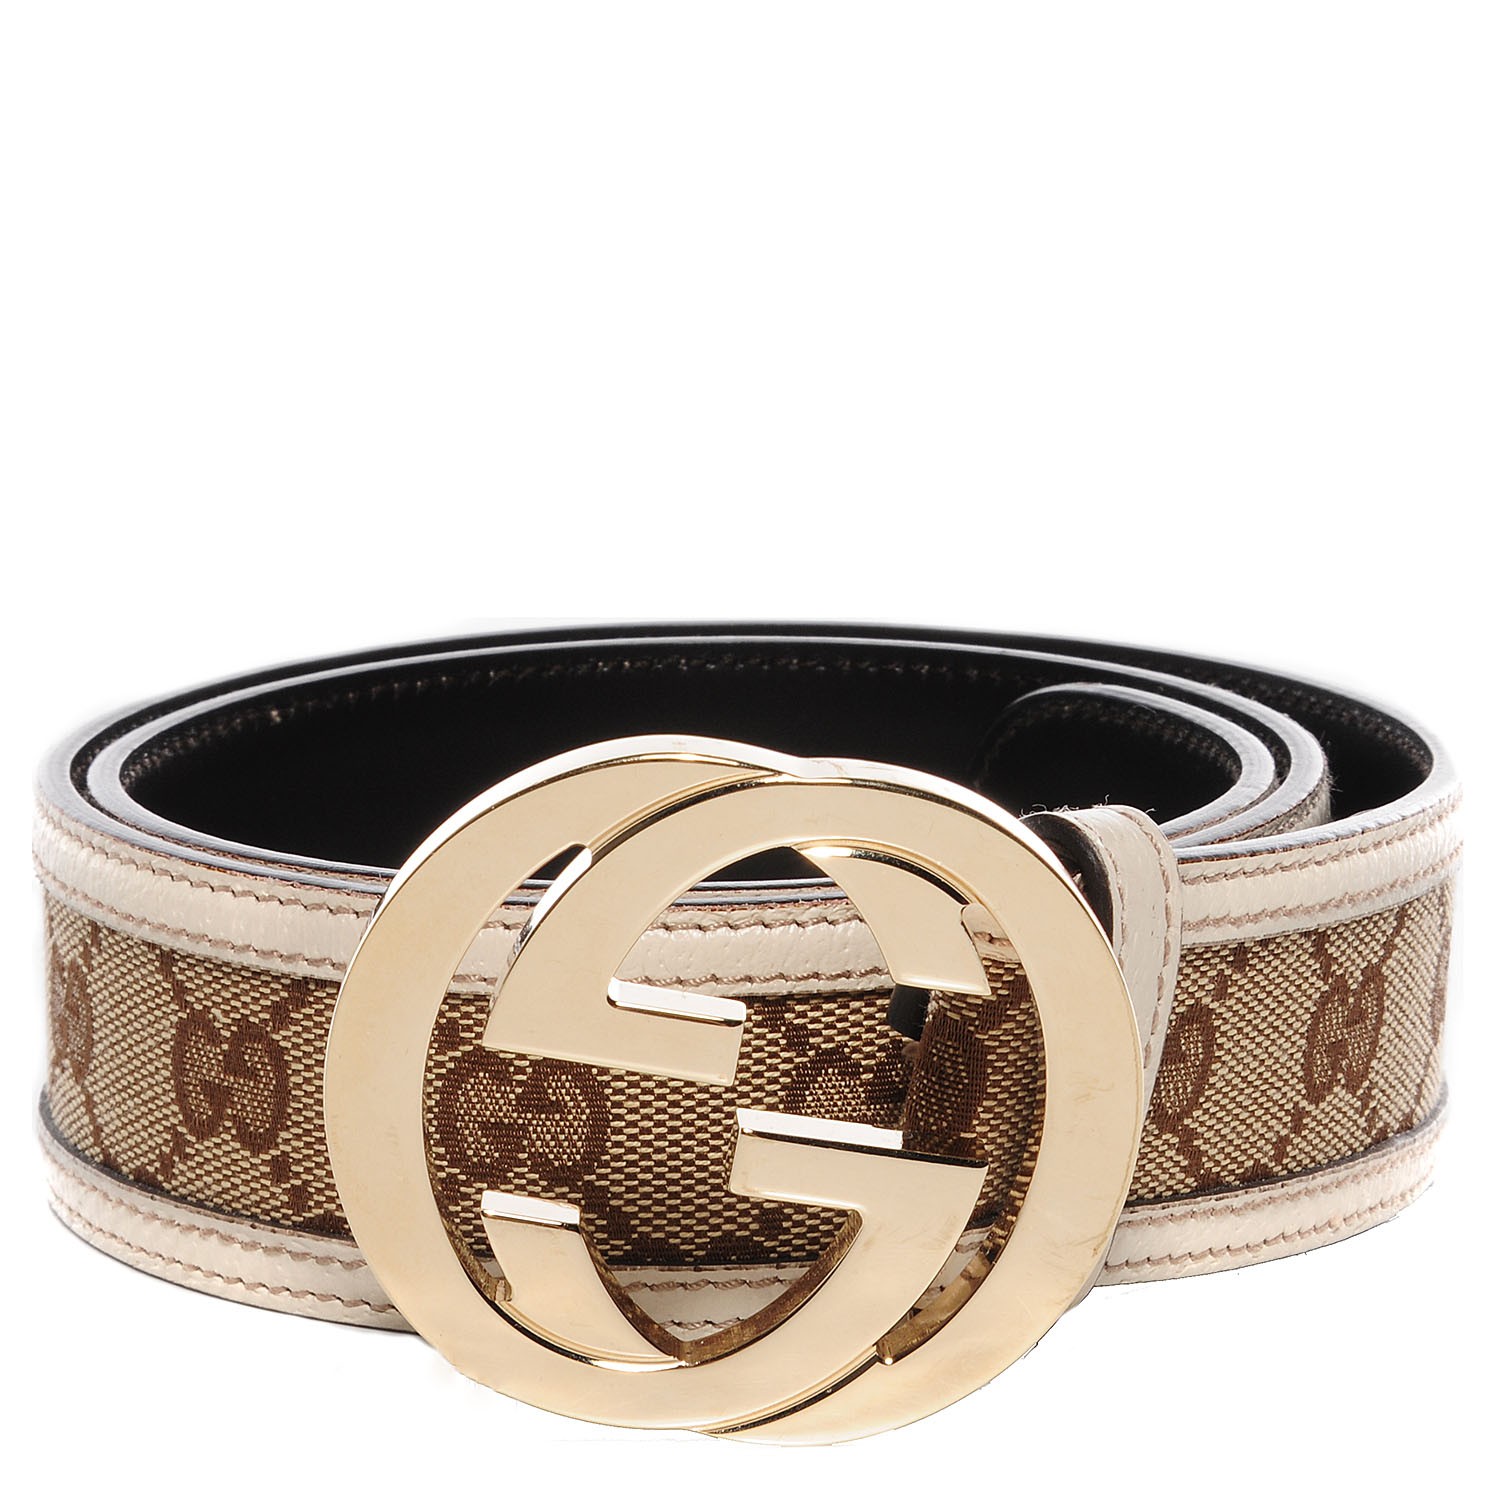 white gucci belt with gold buckle